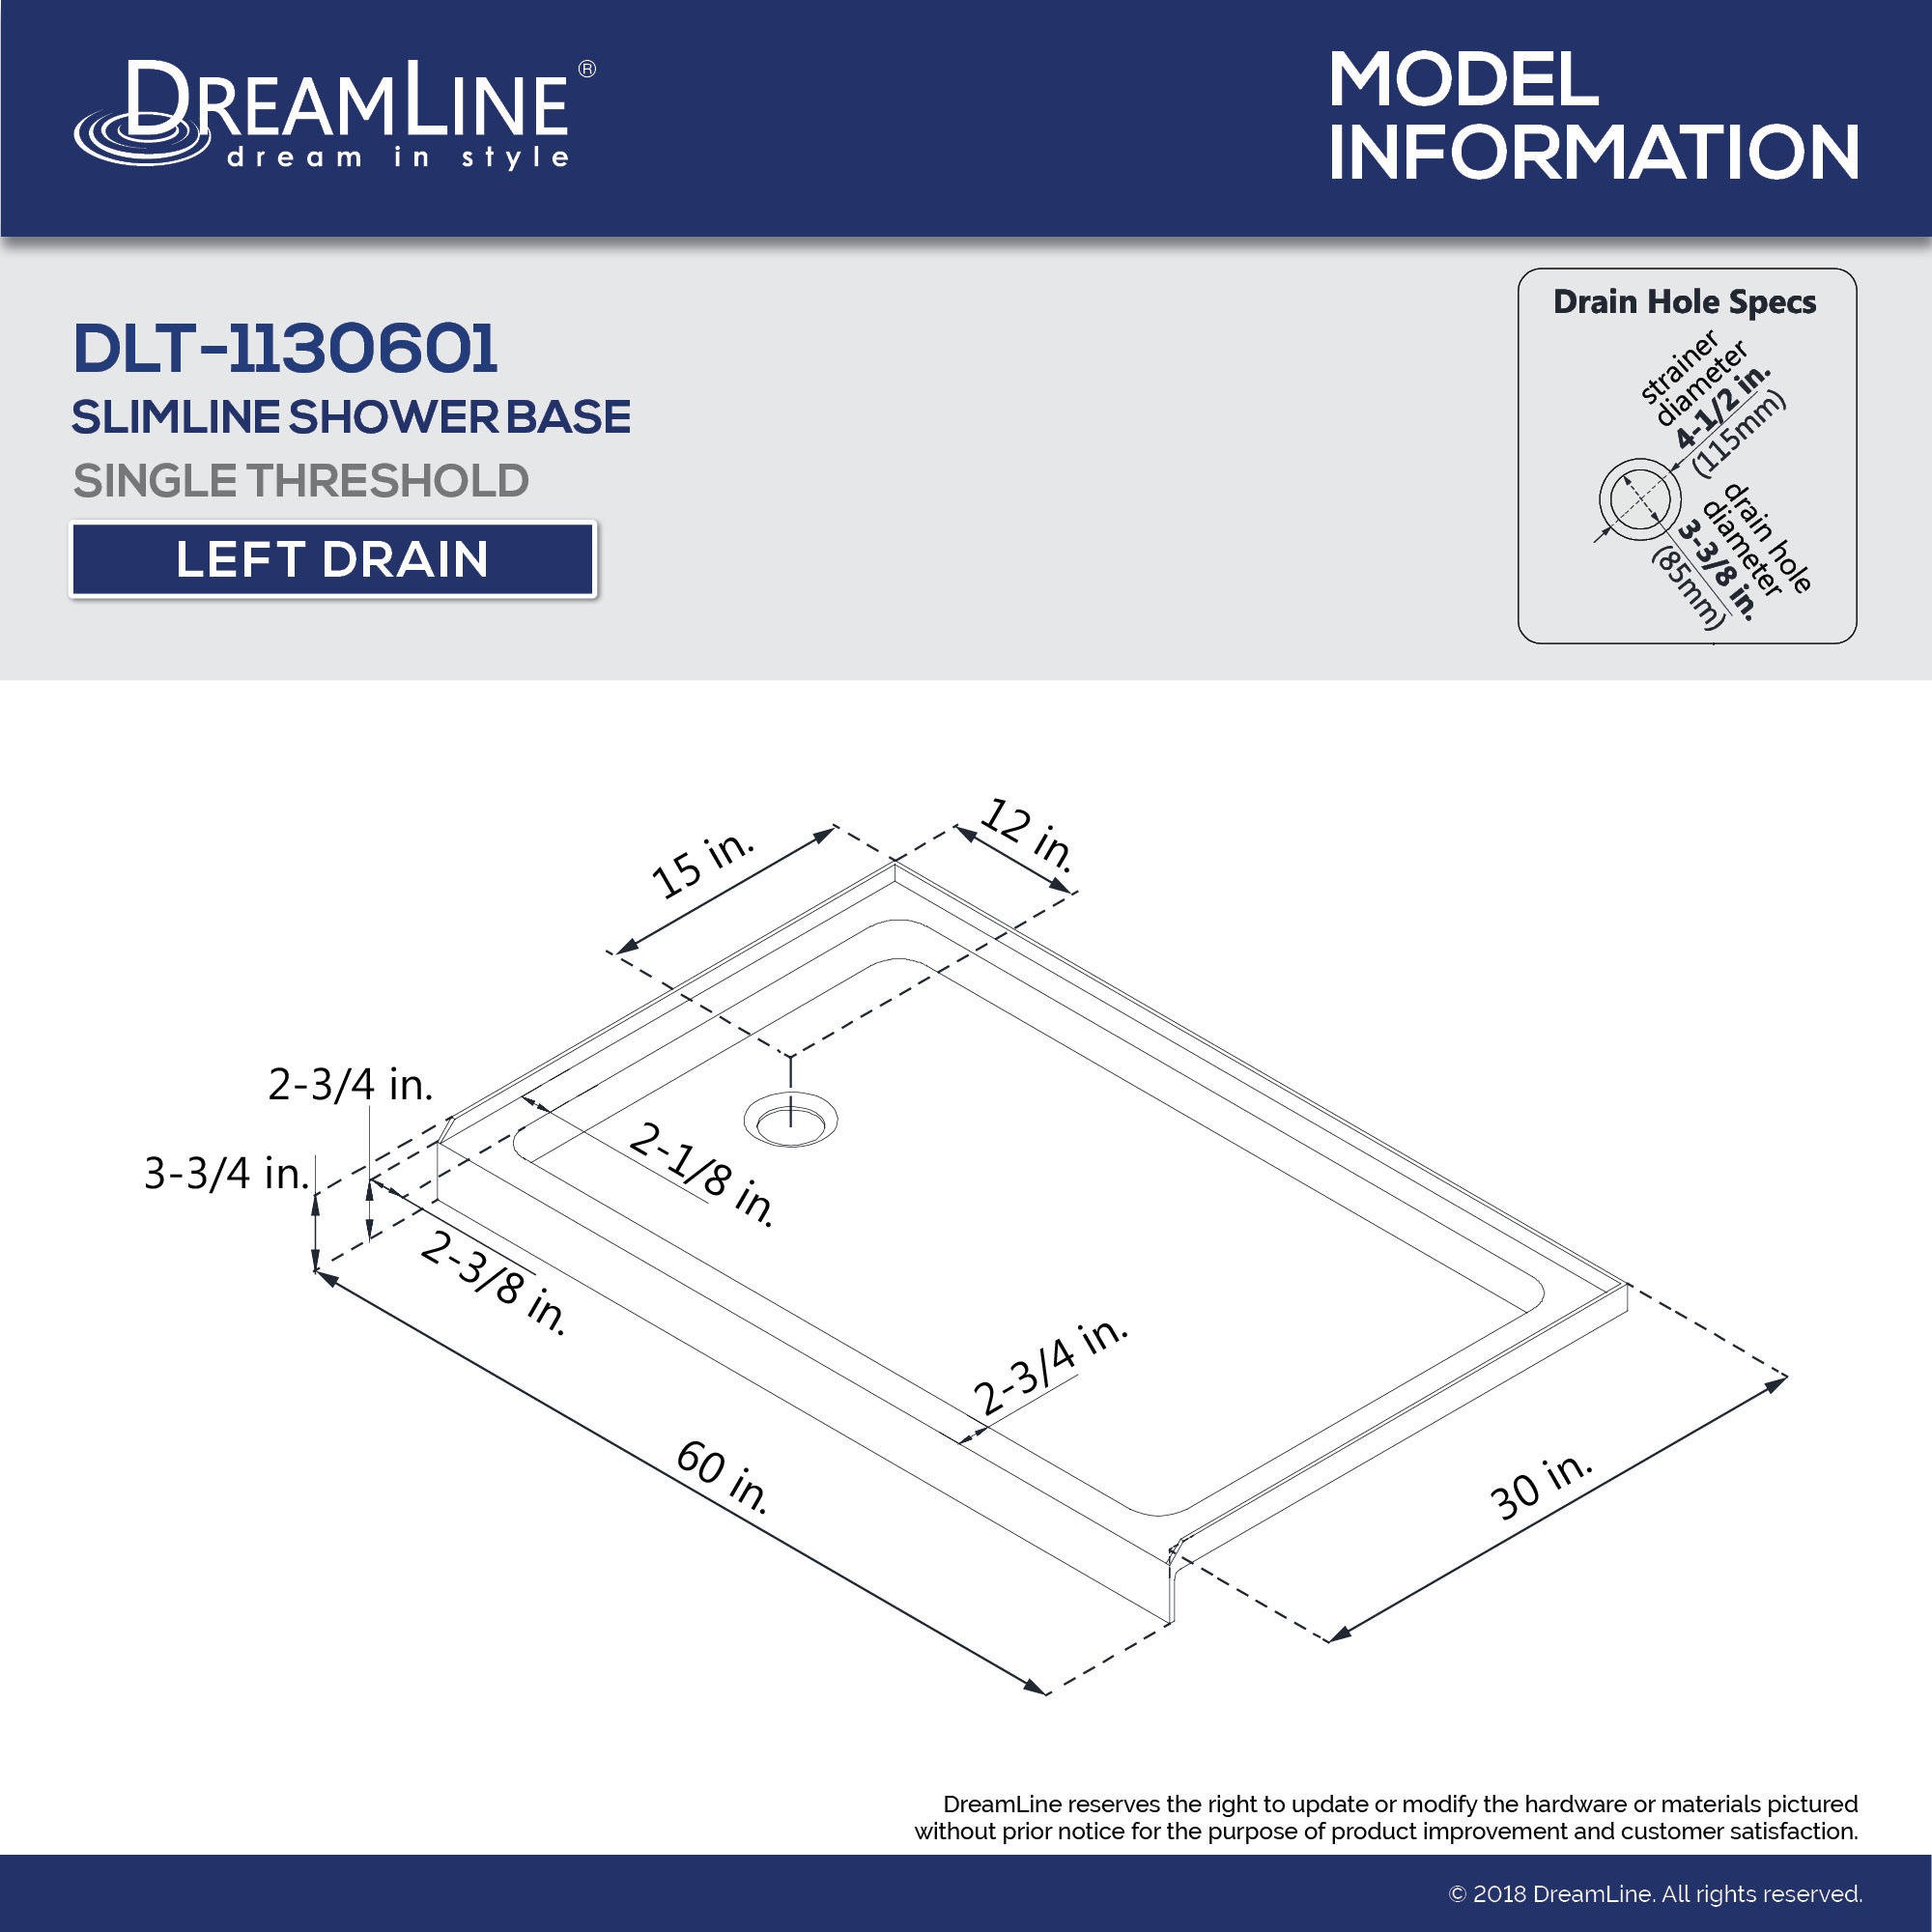 DreamLine Duet 30 in. D x 60 in. W x 74 3/4 in. H Bypass Shower Door in Chrome with Left Drain Biscuit Base Kit